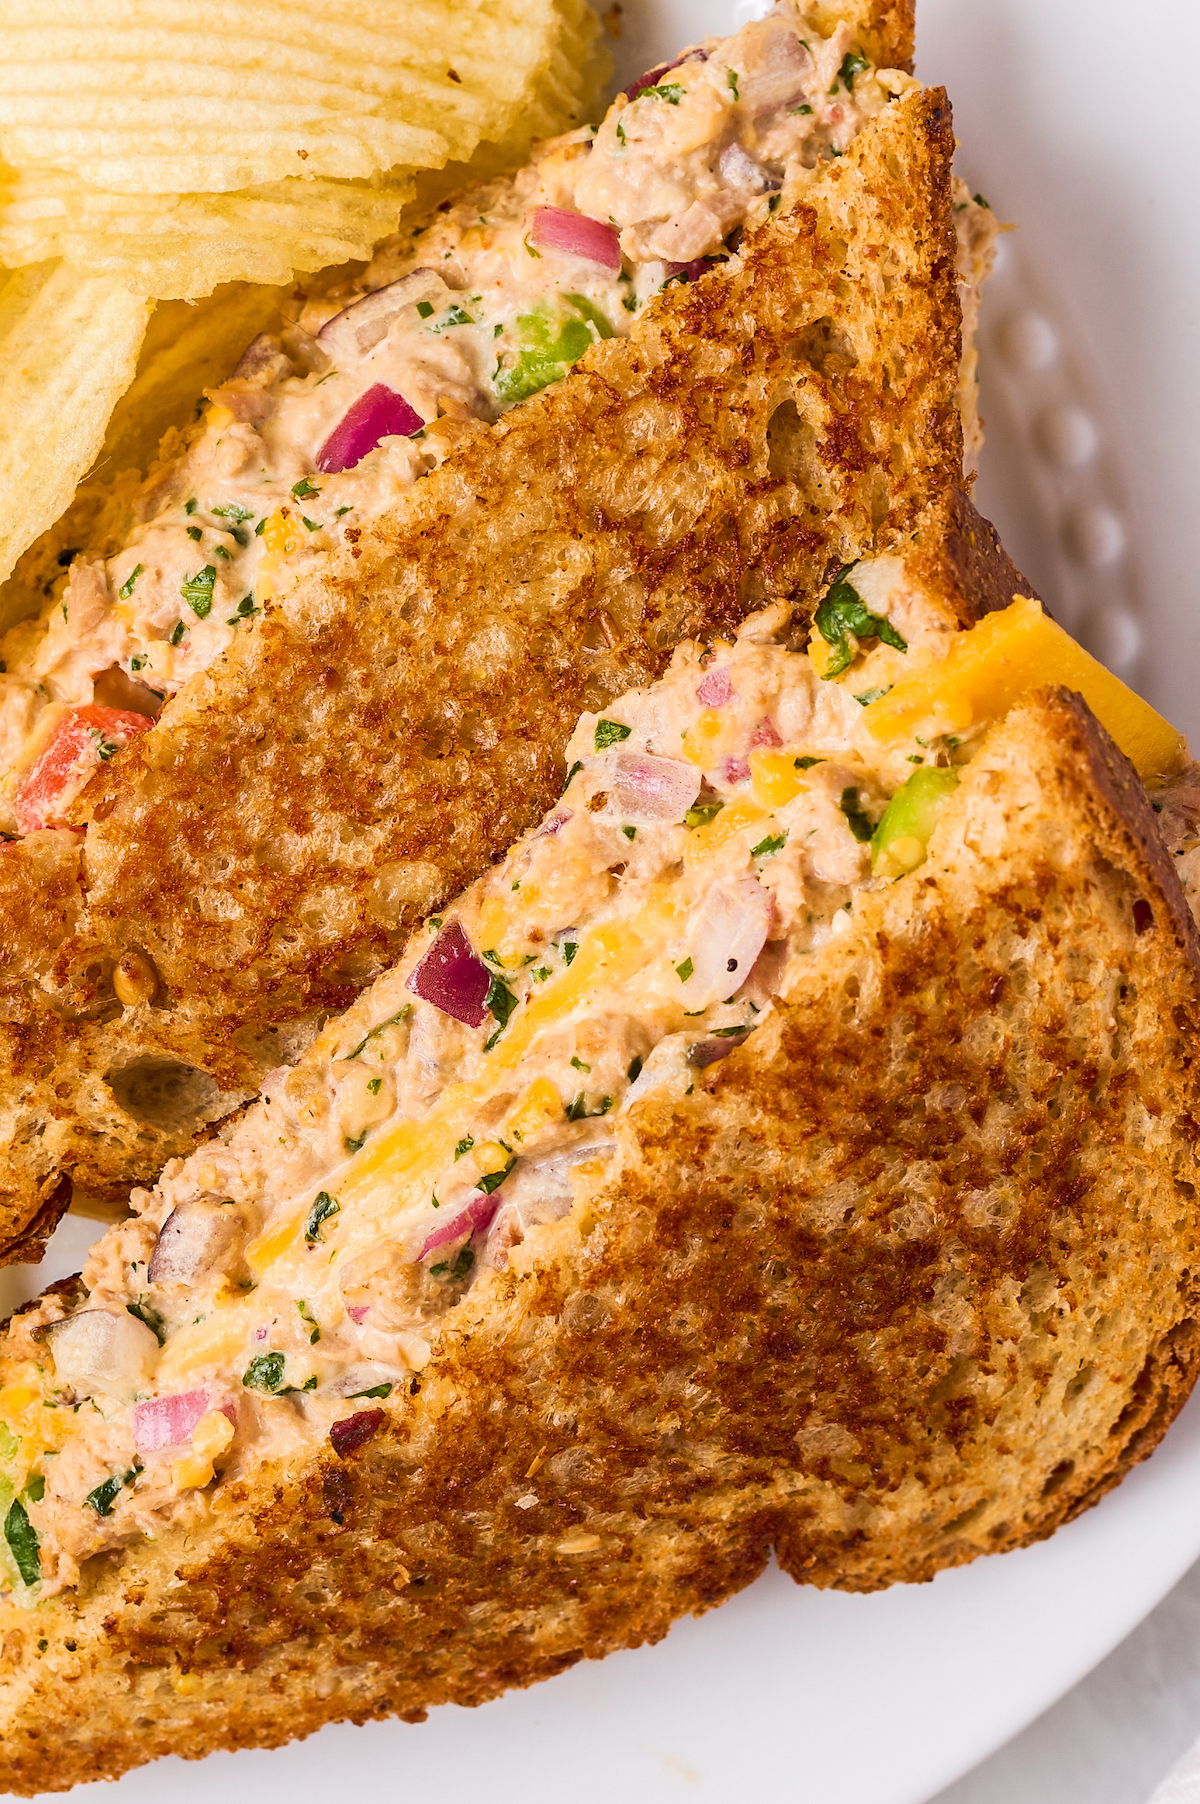 Close-up shot of two tuna melt sandwich halves, showing the texture of the filling.